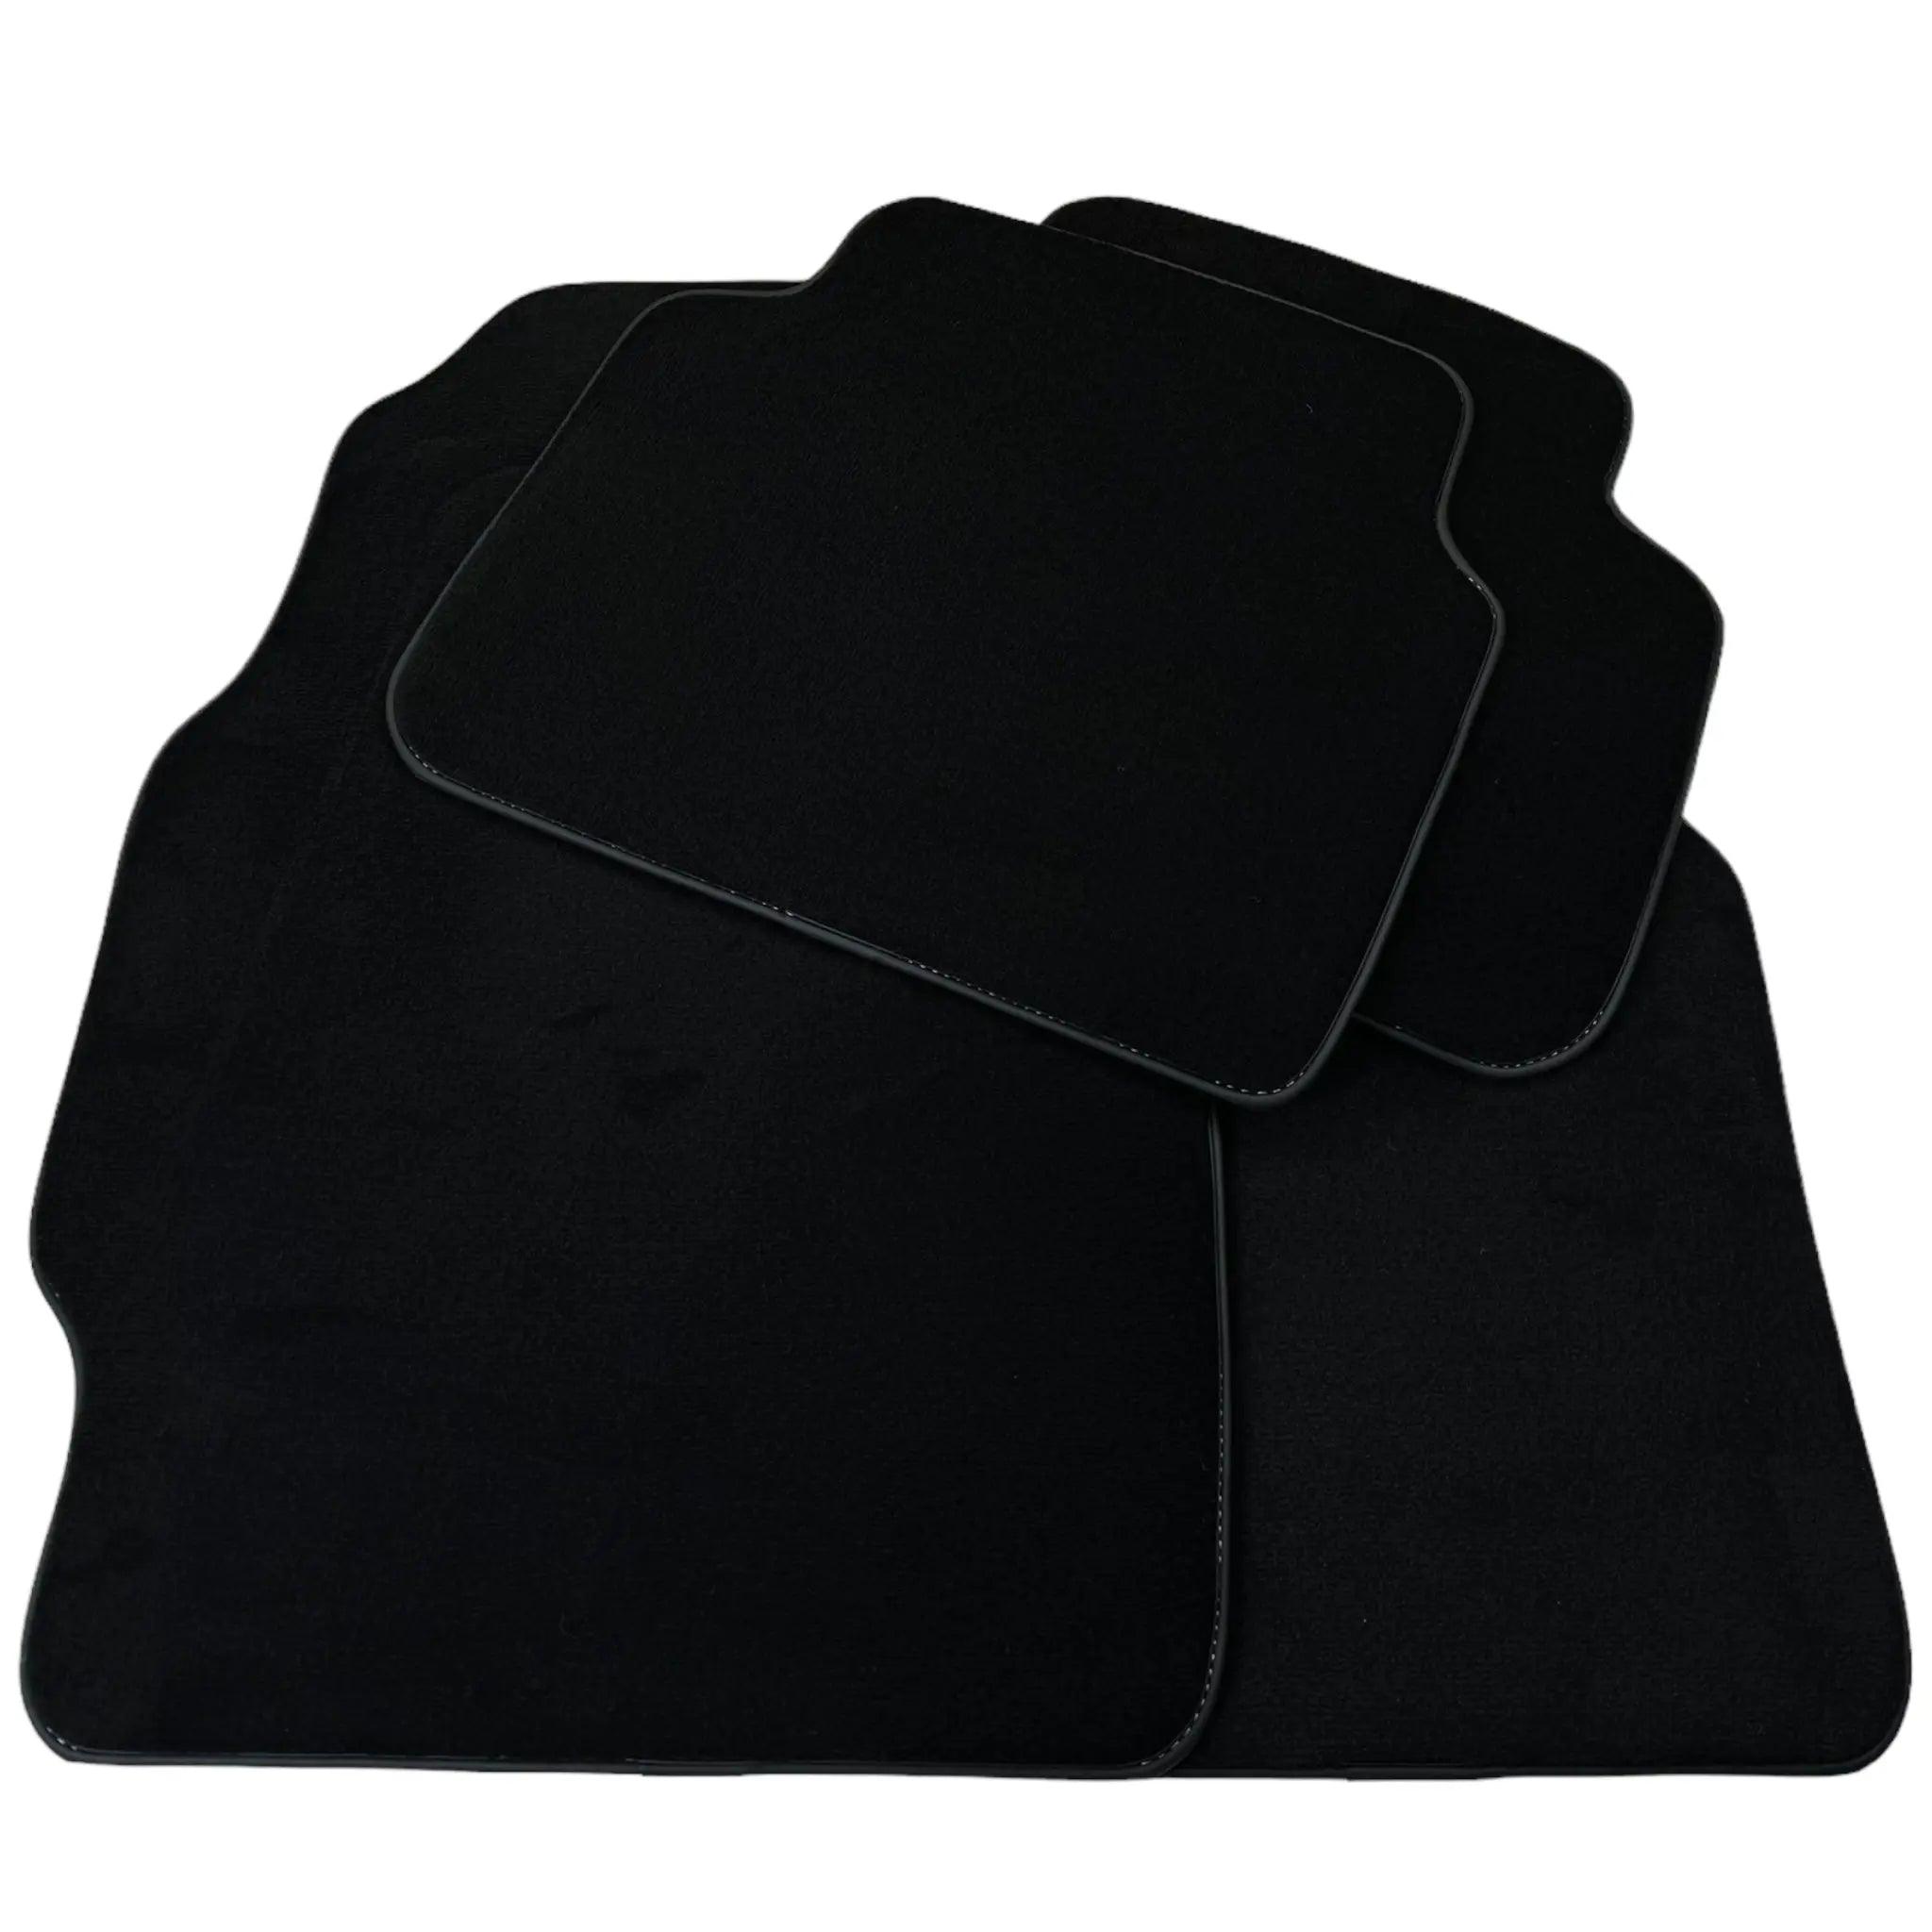 Black Floor Mats for Acura Integra DC2 Type R Coupe (1995-2001)